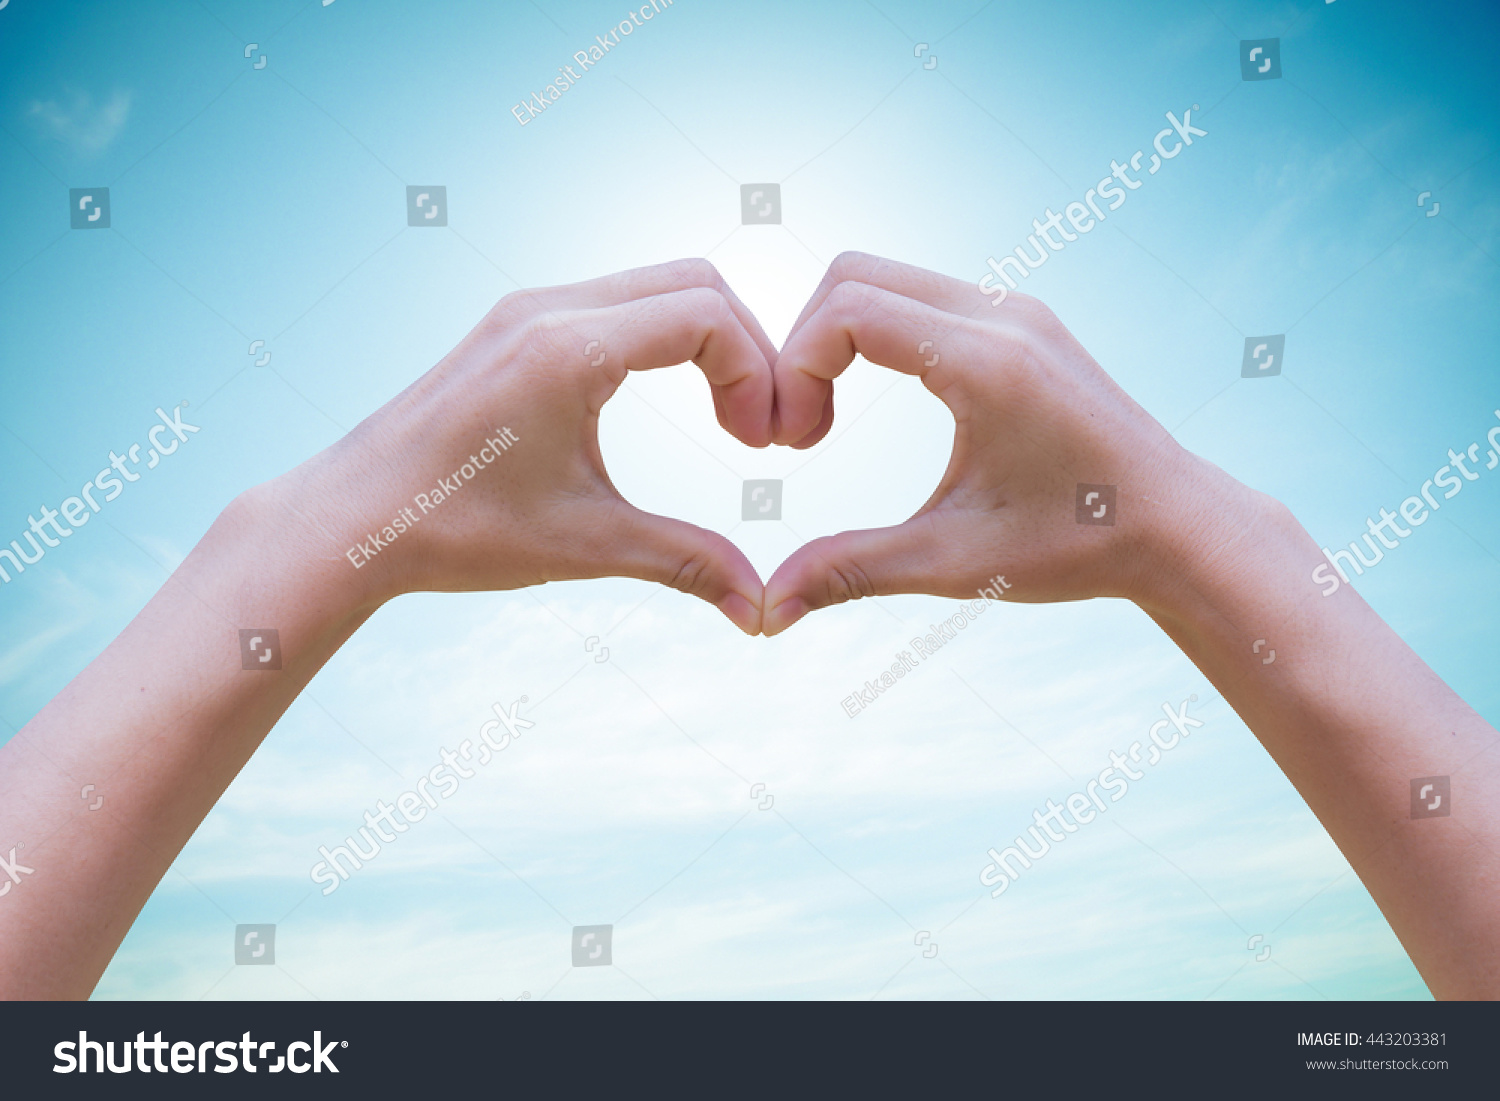 Human hands Heart shaped the sky in the background blurred.Environment Day concept. The power harmonious #443203381